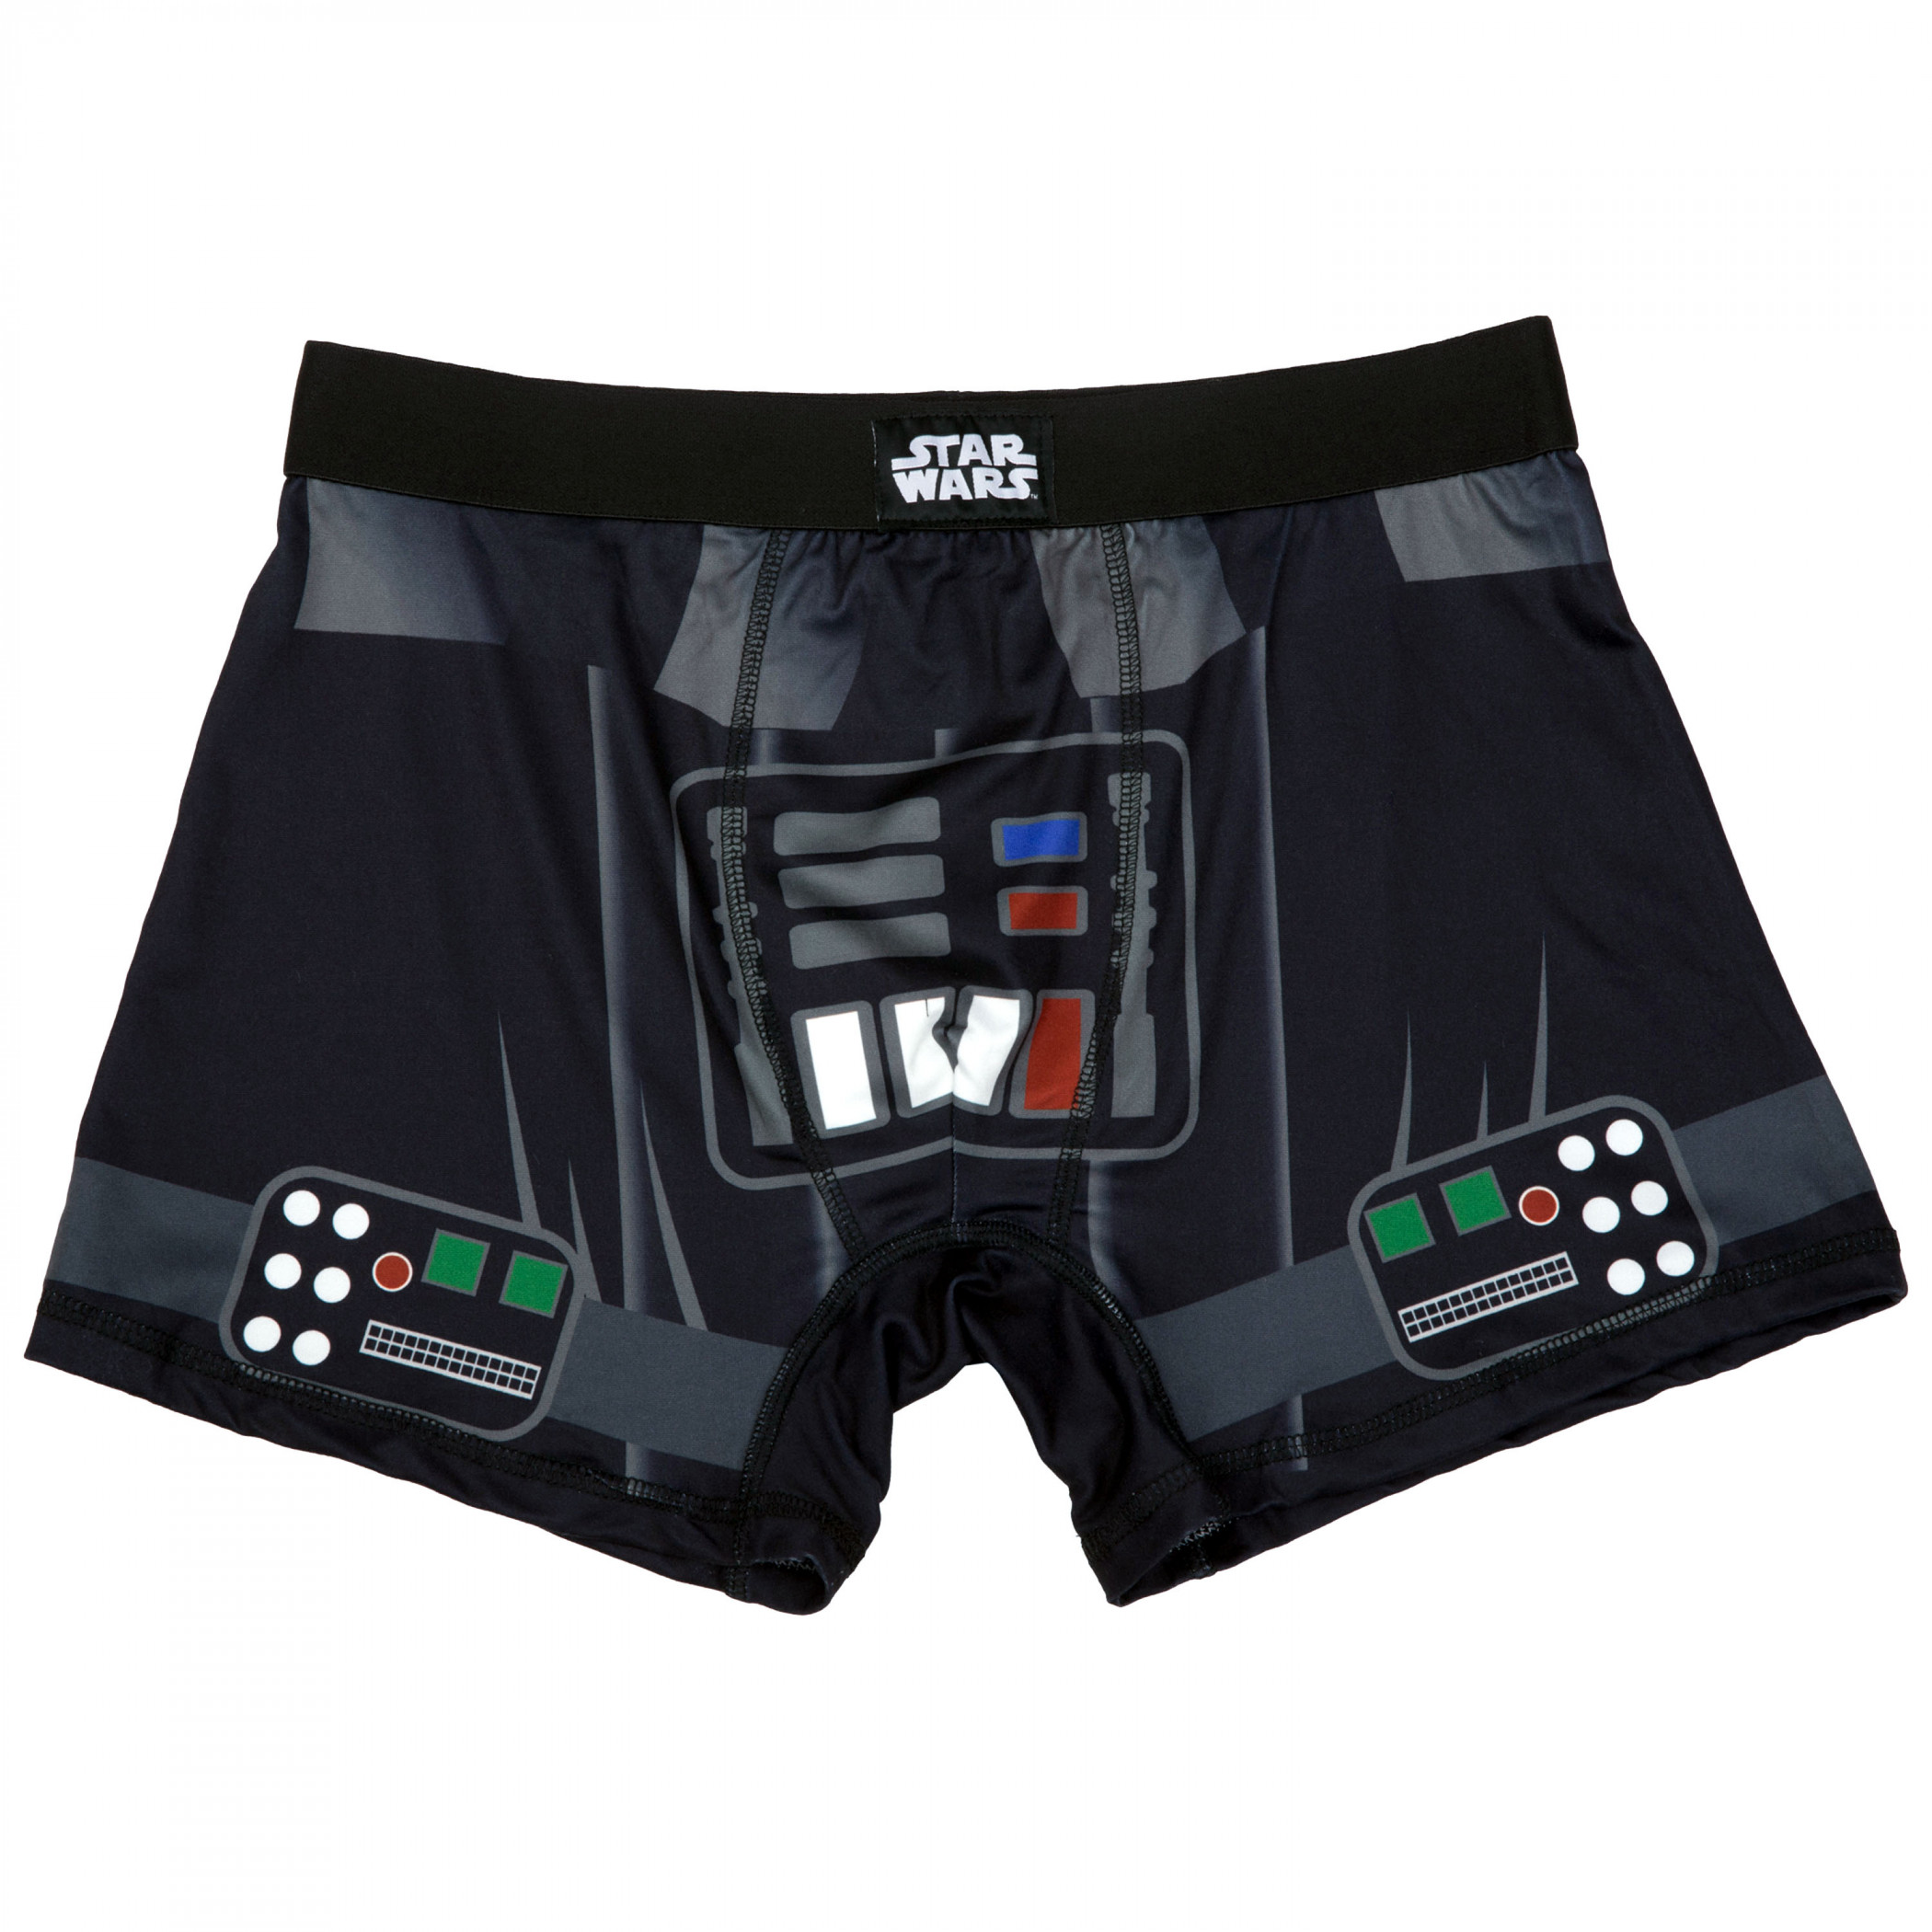 Free: 2 pair NWT Star Wars mens underwear - Darth Vader so cool. - Men's  Clothing -  Auctions for Free Stuff